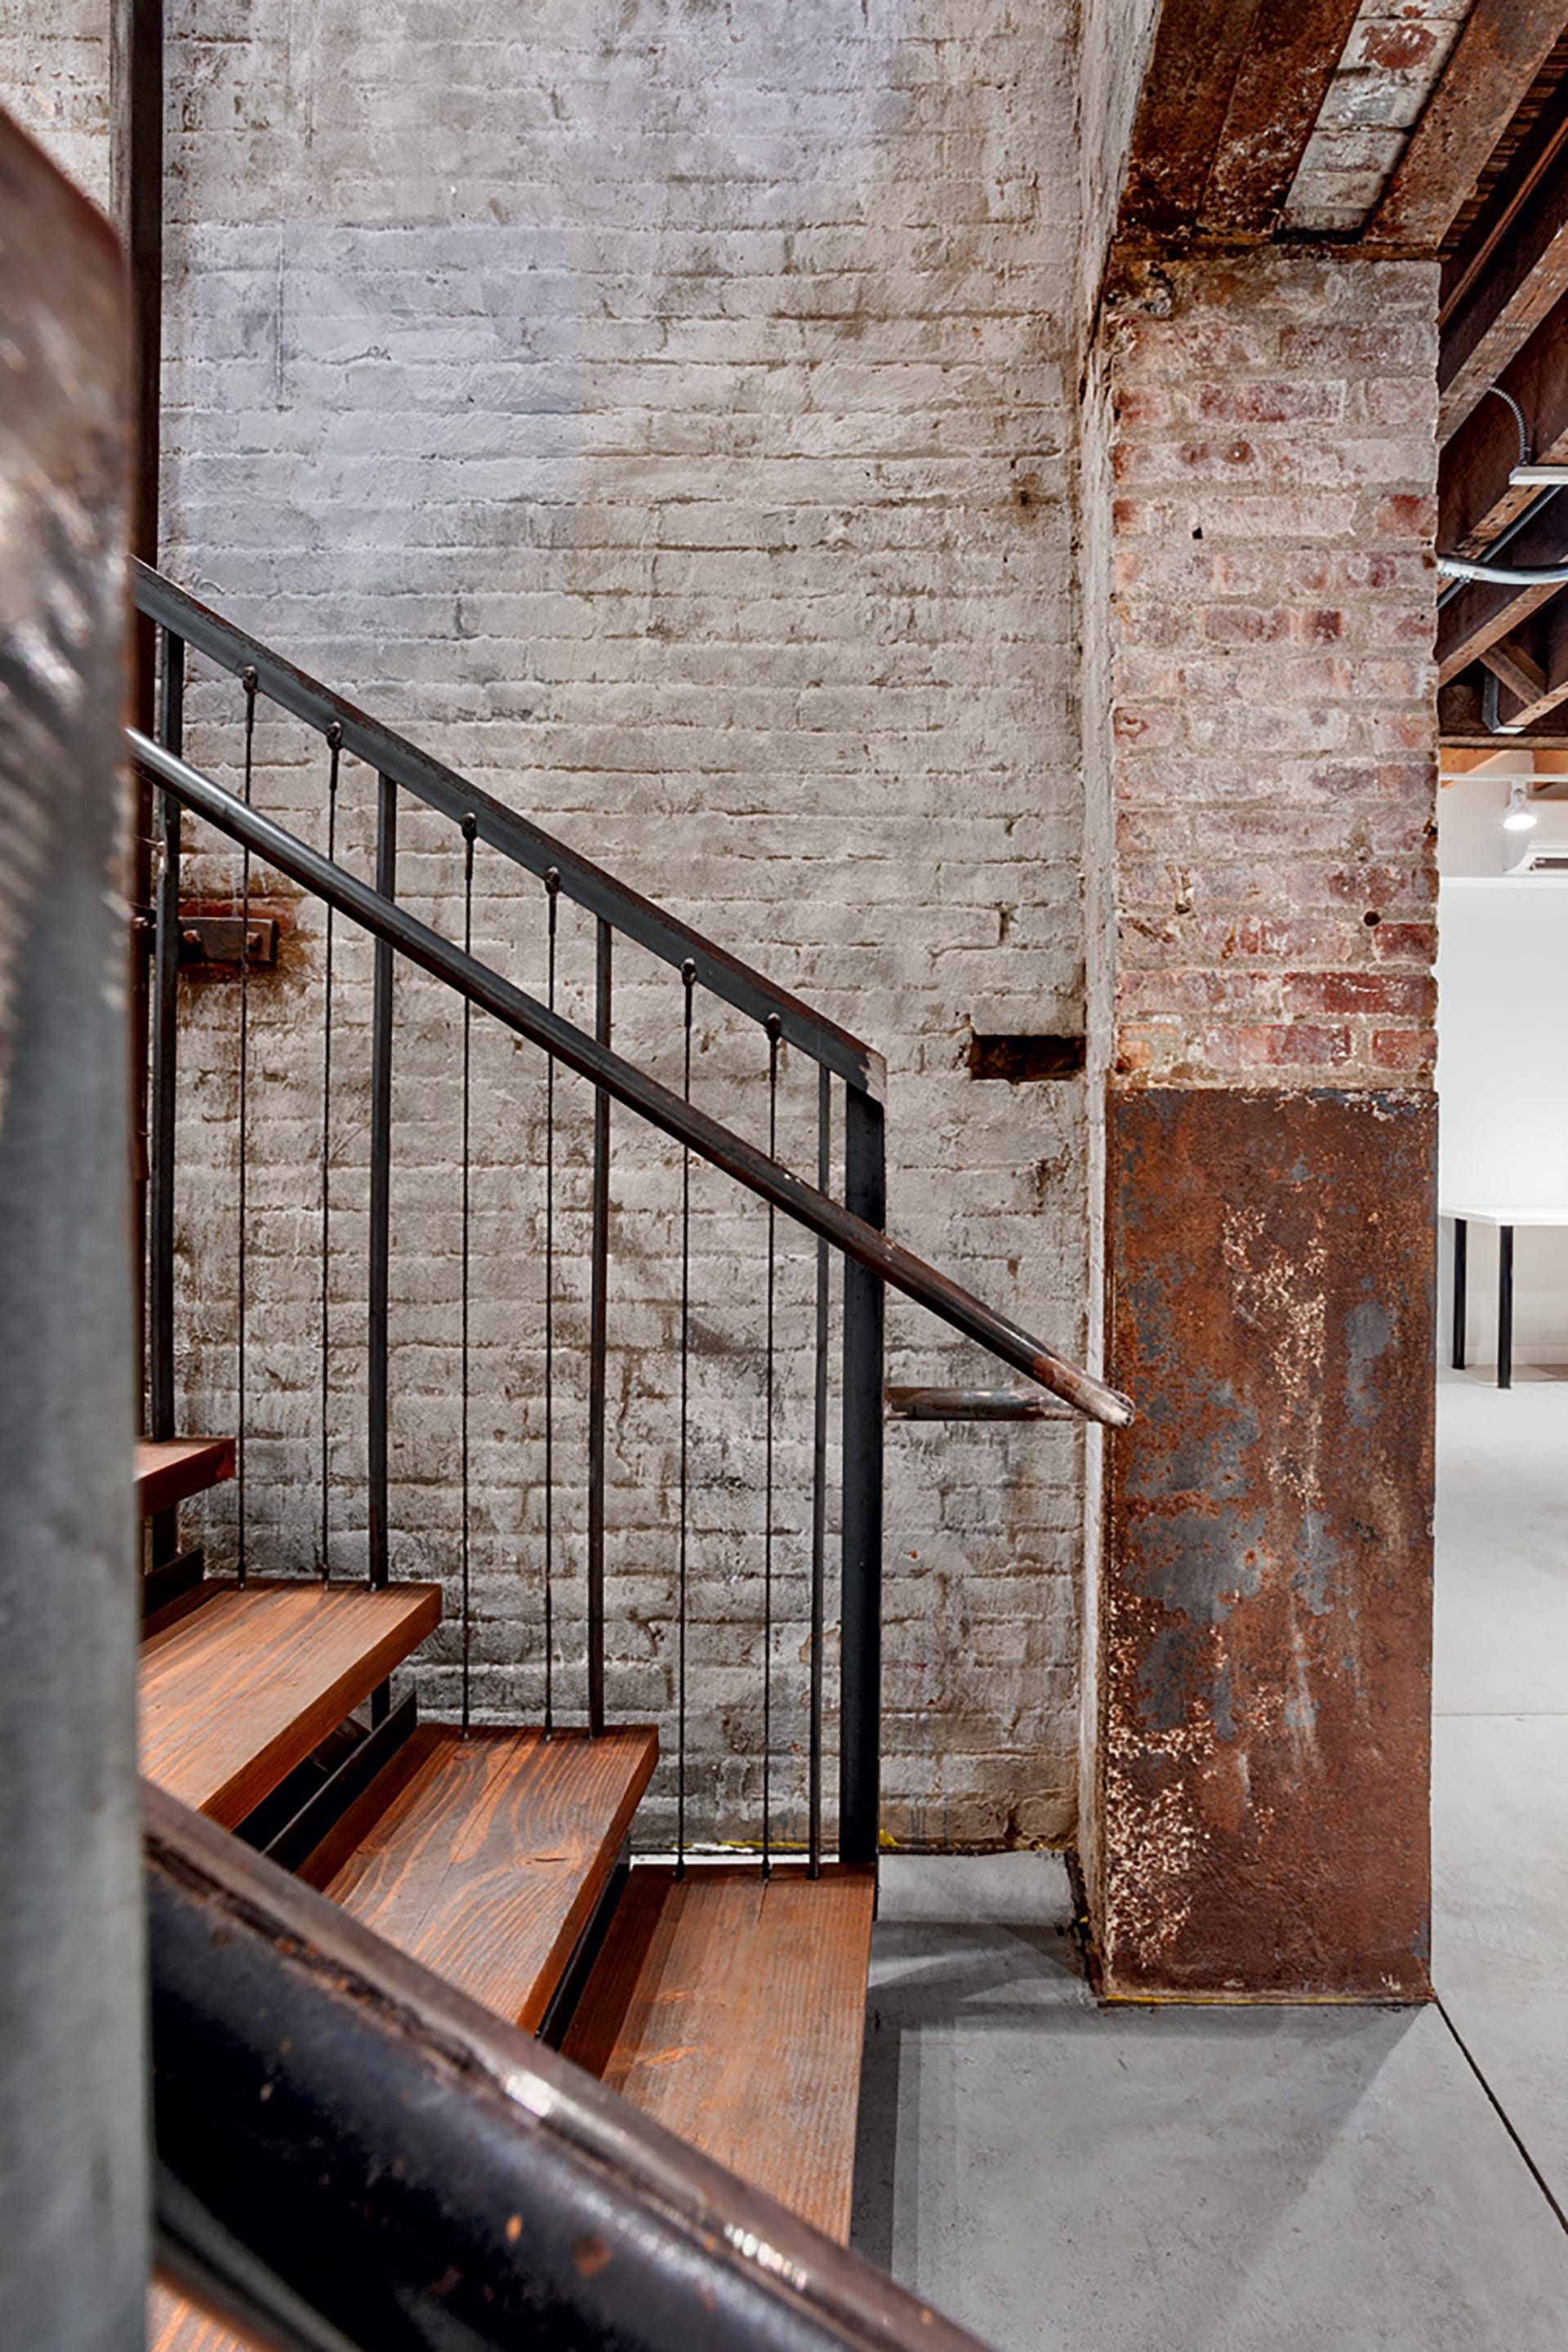 Stair landing with a wood-and-metal staircase in a converted elevator shaft with exposed brick